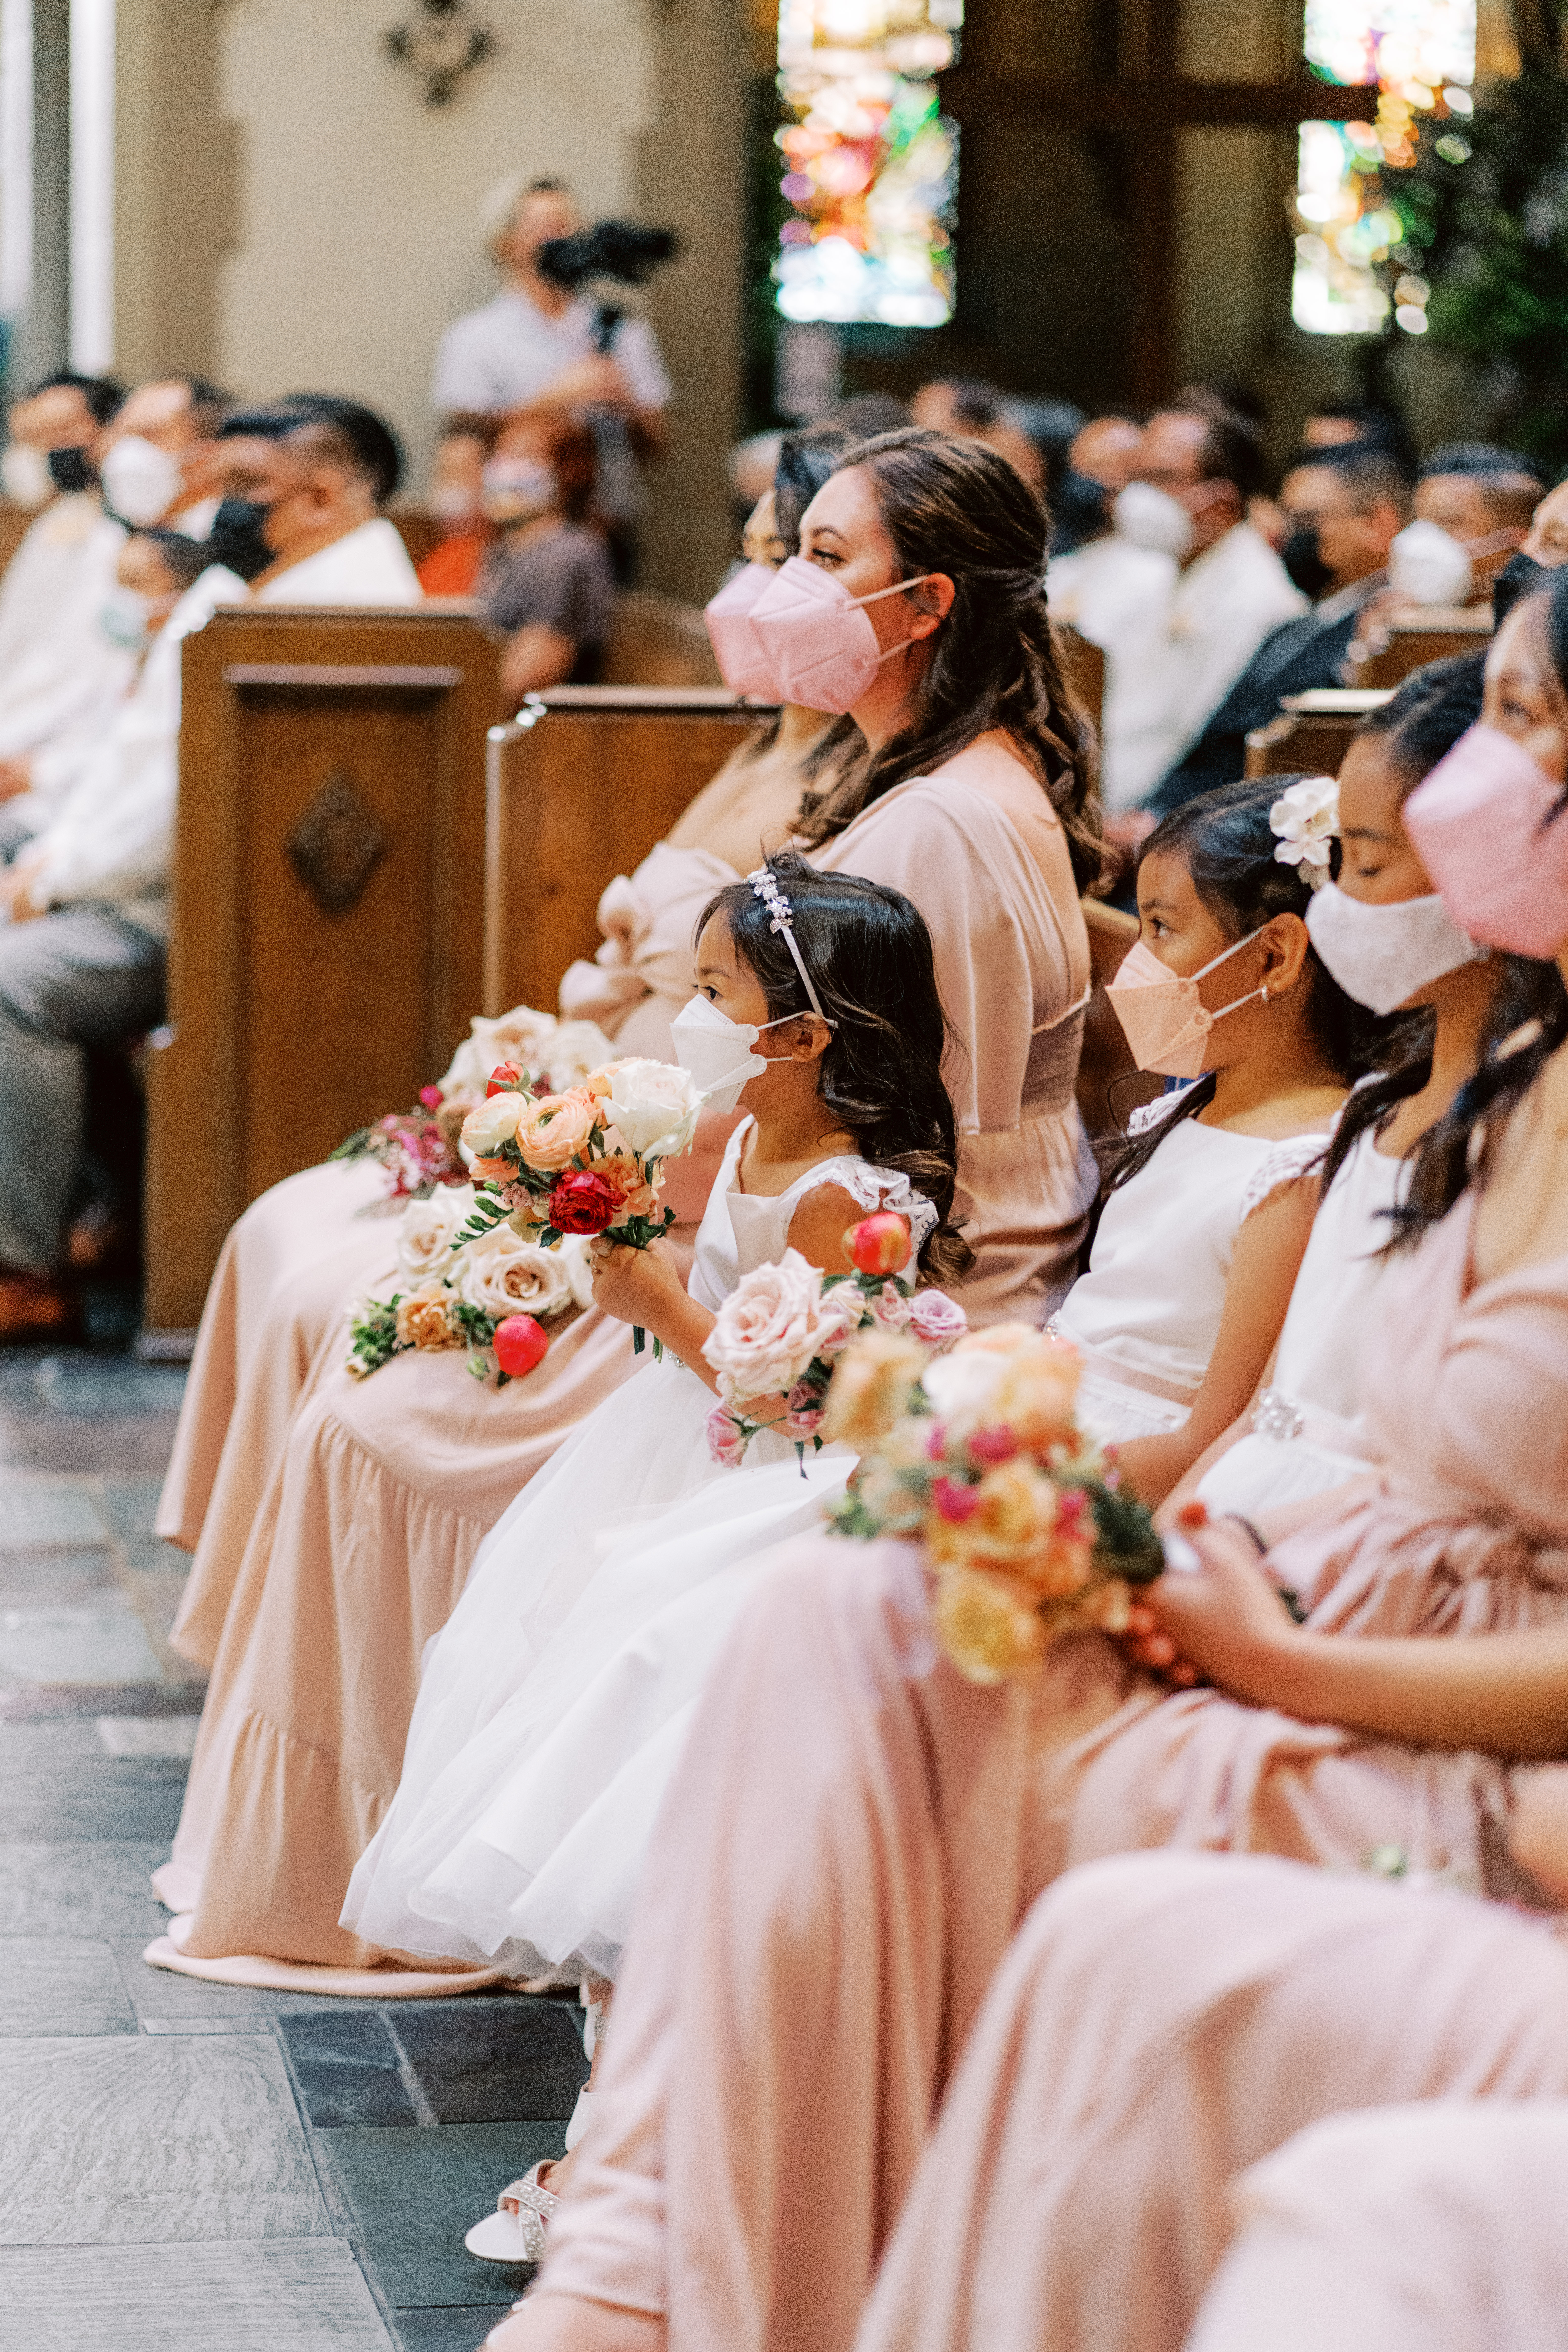 bridesmaids in light peach dresses with m matching masks sit with flower girls in white dresses and masks during church wedding ceremony